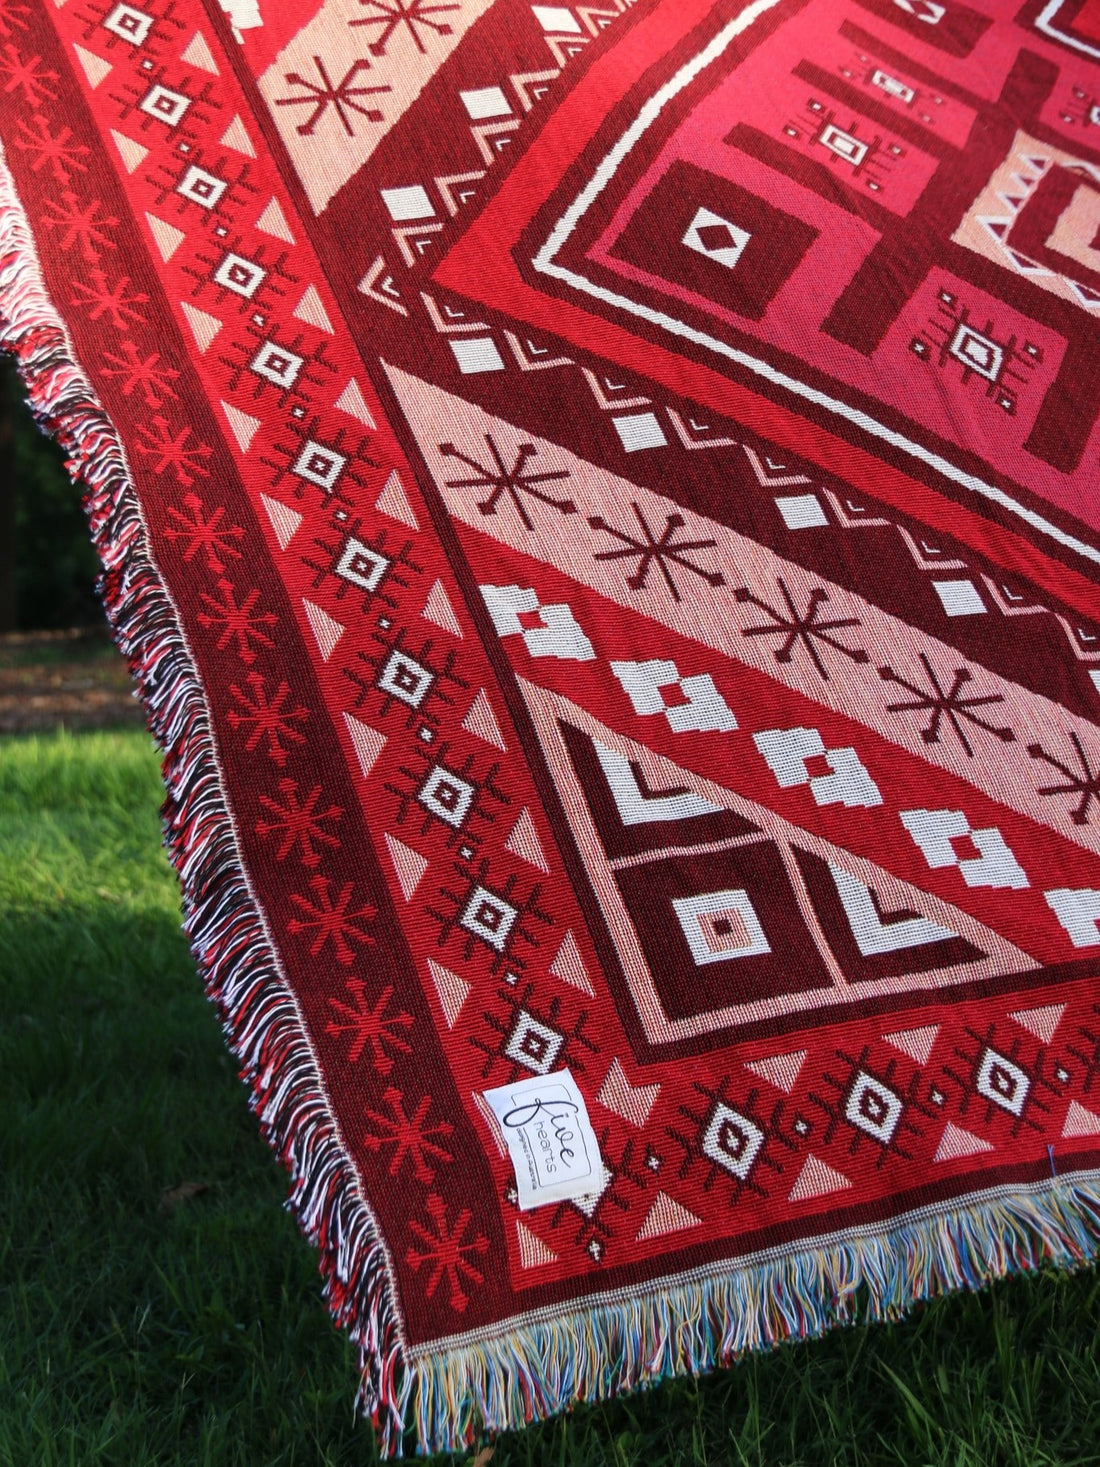 Red throw rug picnic blanket. Modern woven throw, sustainably made recycled cotton. XL size picnic rug